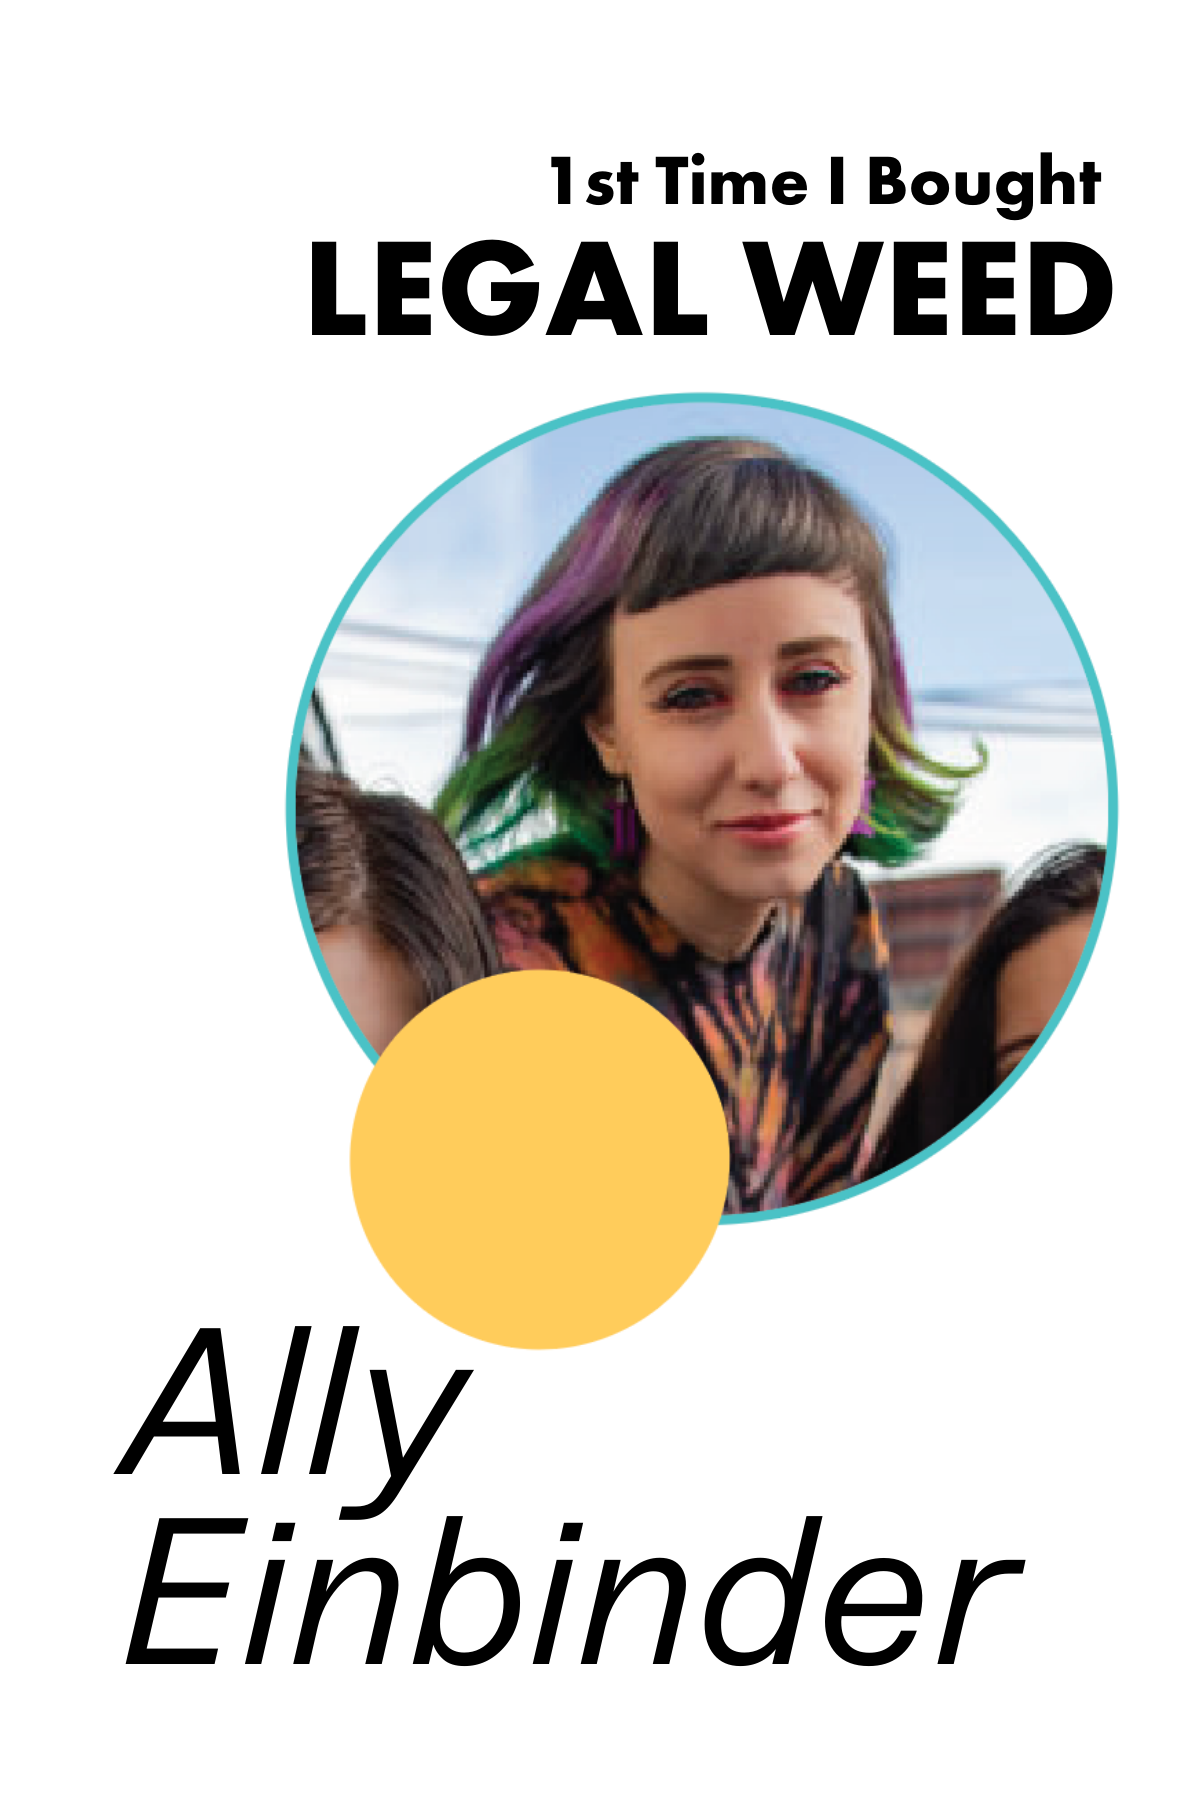 80. The 1st Time I Bought Legal Weed: Ally Einbinder, Bassist for Potty Mouth